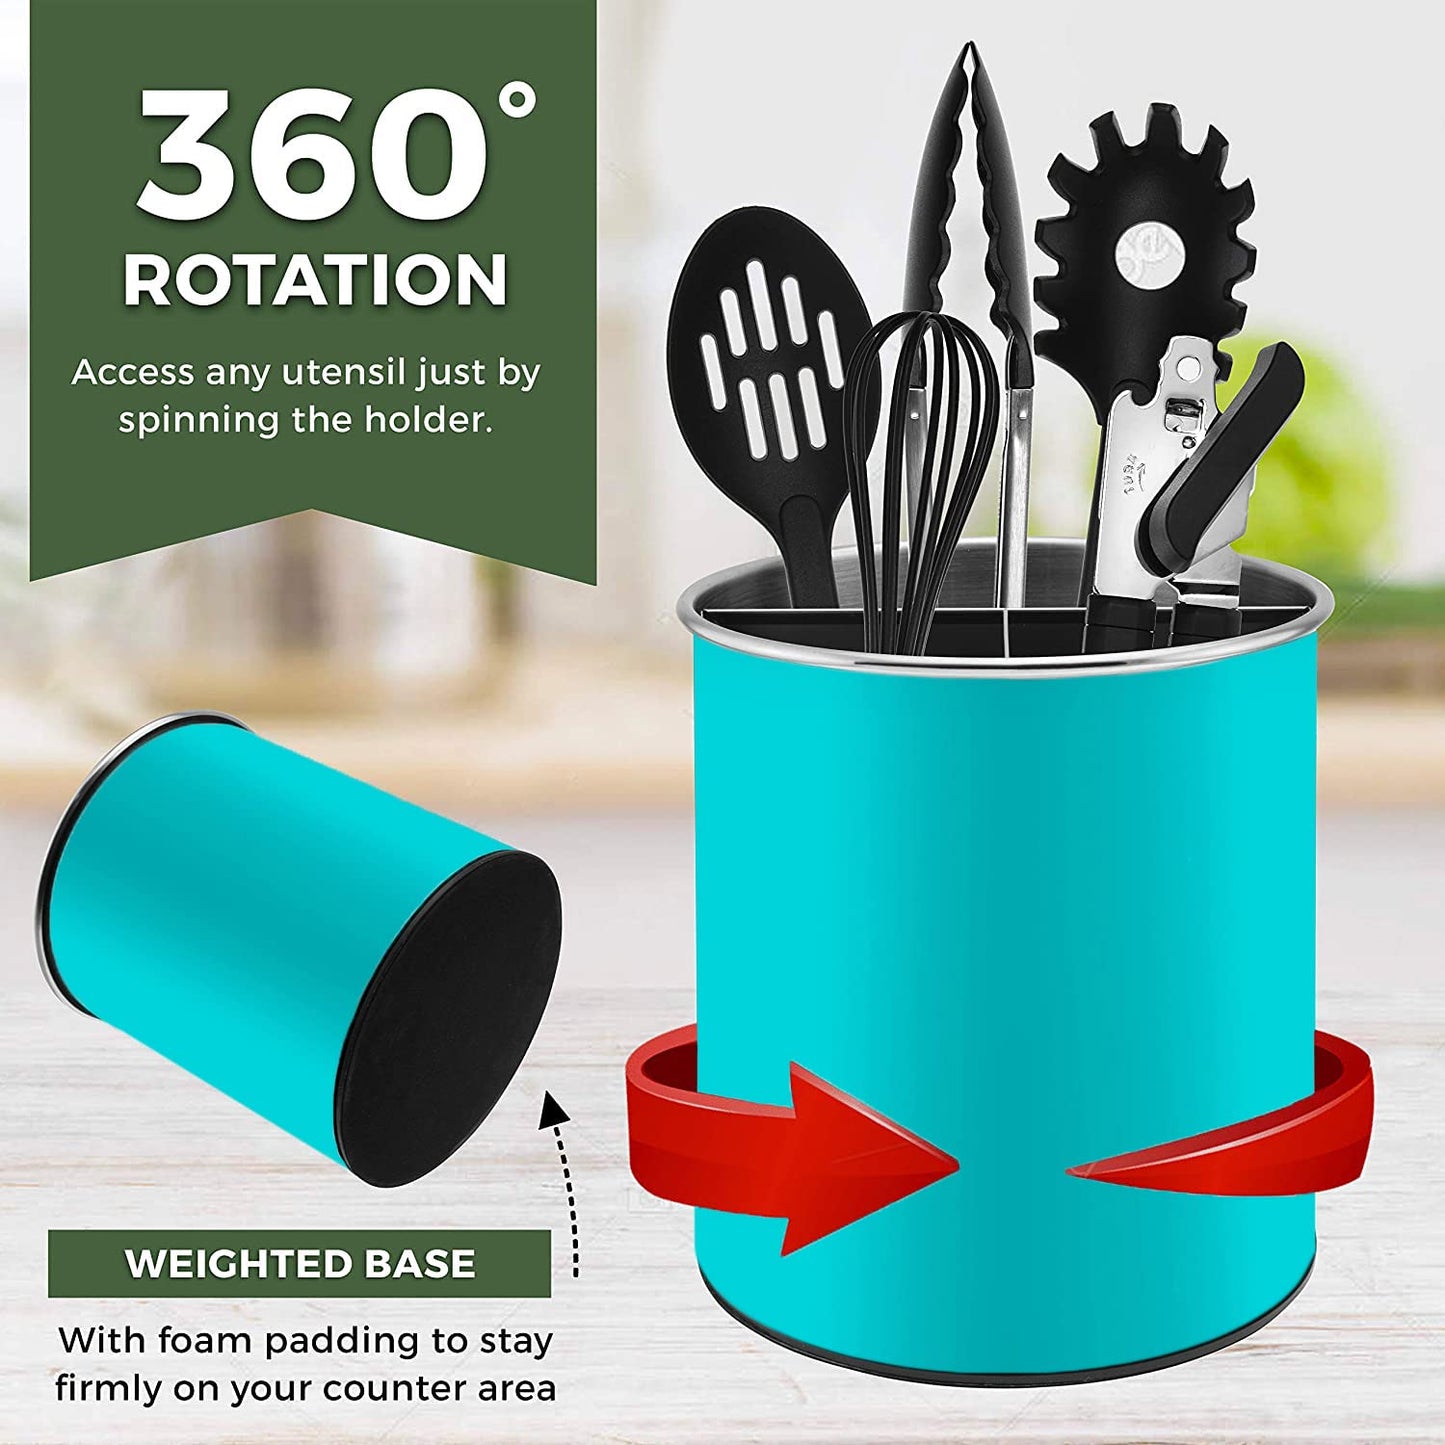 Bartnelli Extra Large Stainless Steel Kitchen Utensil Holder - 360° Rotating Utensil Caddy - Weighted Base for Stability - Countertop Organizer Crock With Removable Divider (MISTY TURQUOISE))